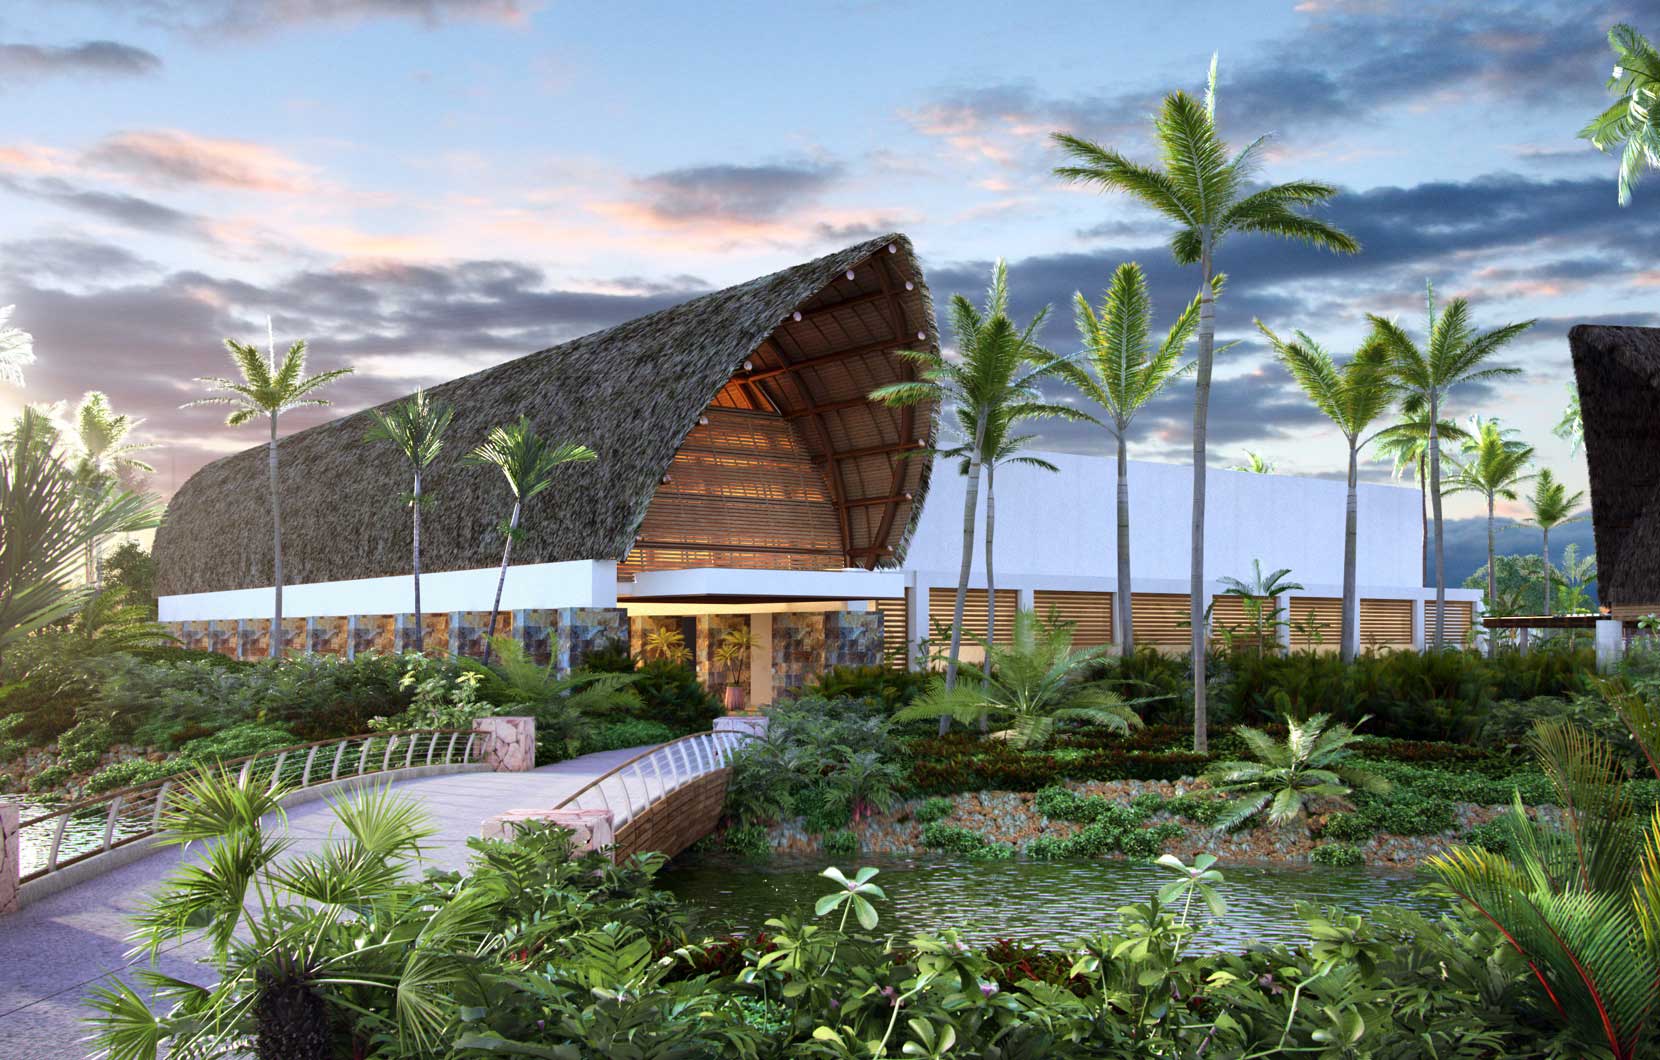 A rendering of the new Convention Center opening later this year at Vidanta Nuevo Vallarta.